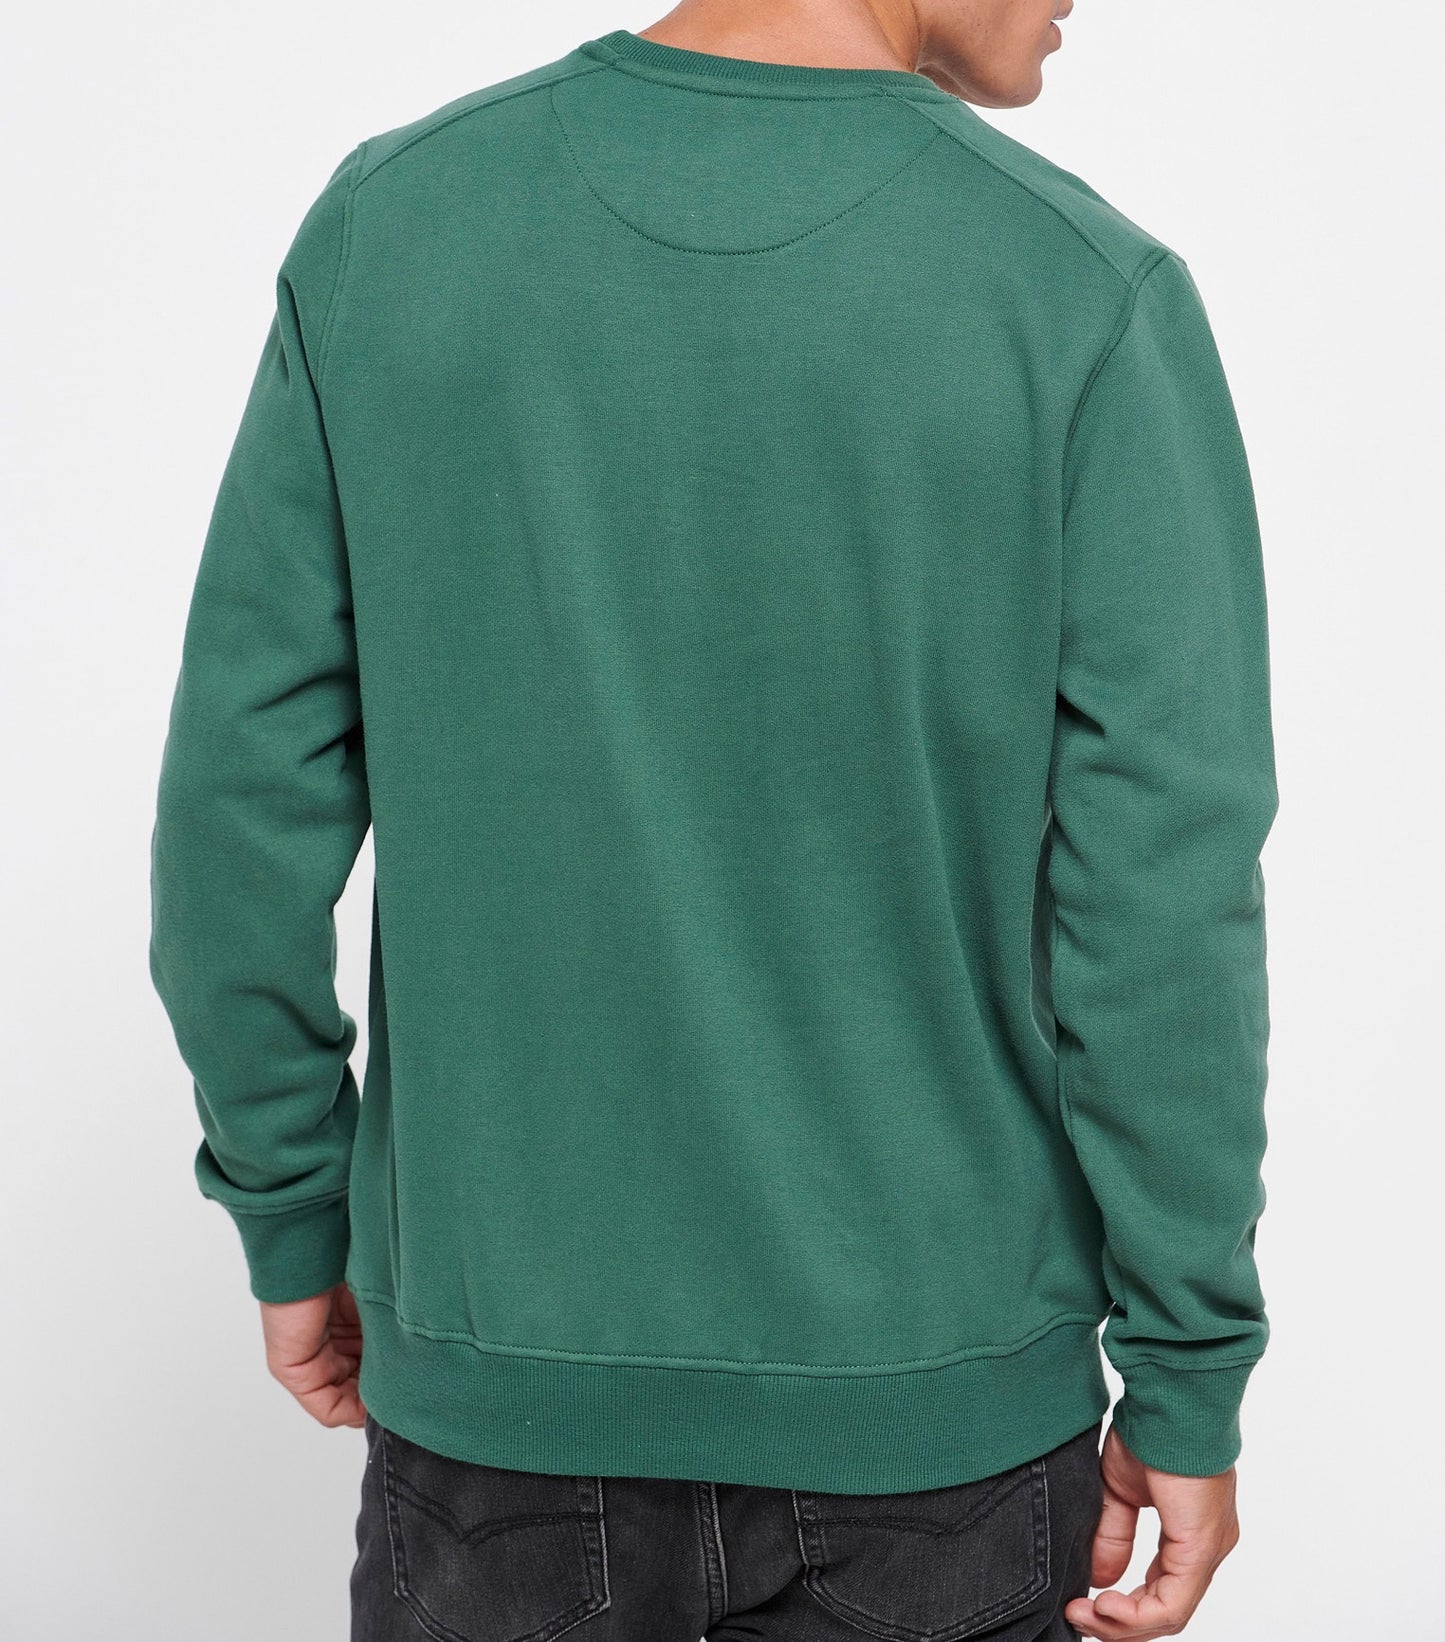 Funky Buddha Sweater Antique Green with 3D print